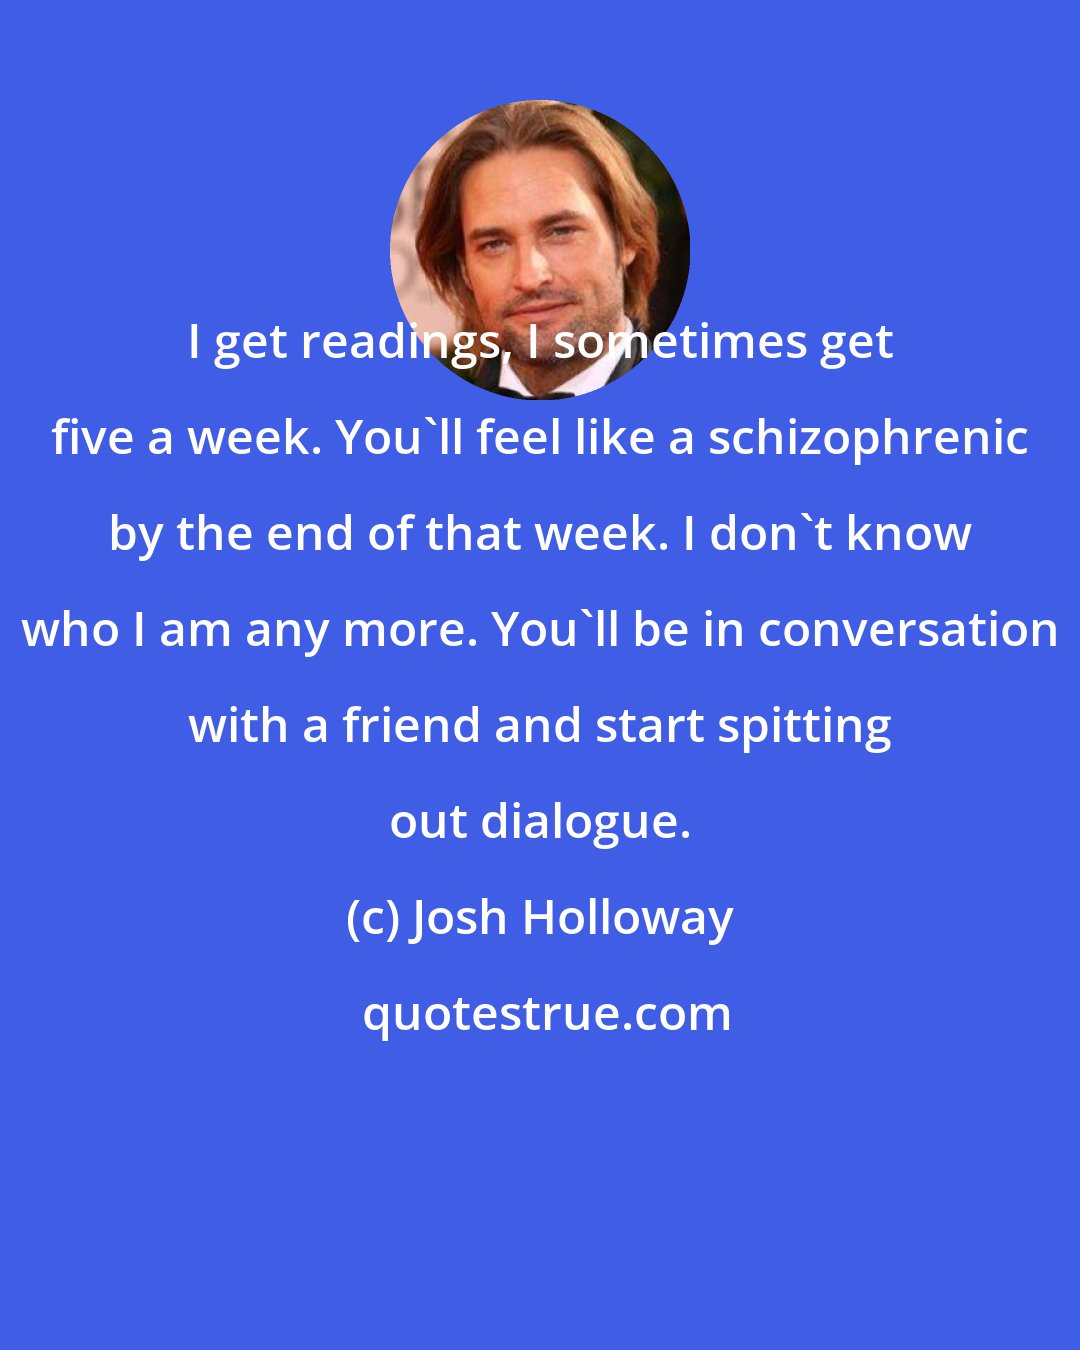 Josh Holloway: I get readings, I sometimes get five a week. You'll feel like a schizophrenic by the end of that week. I don't know who I am any more. You'll be in conversation with a friend and start spitting out dialogue.